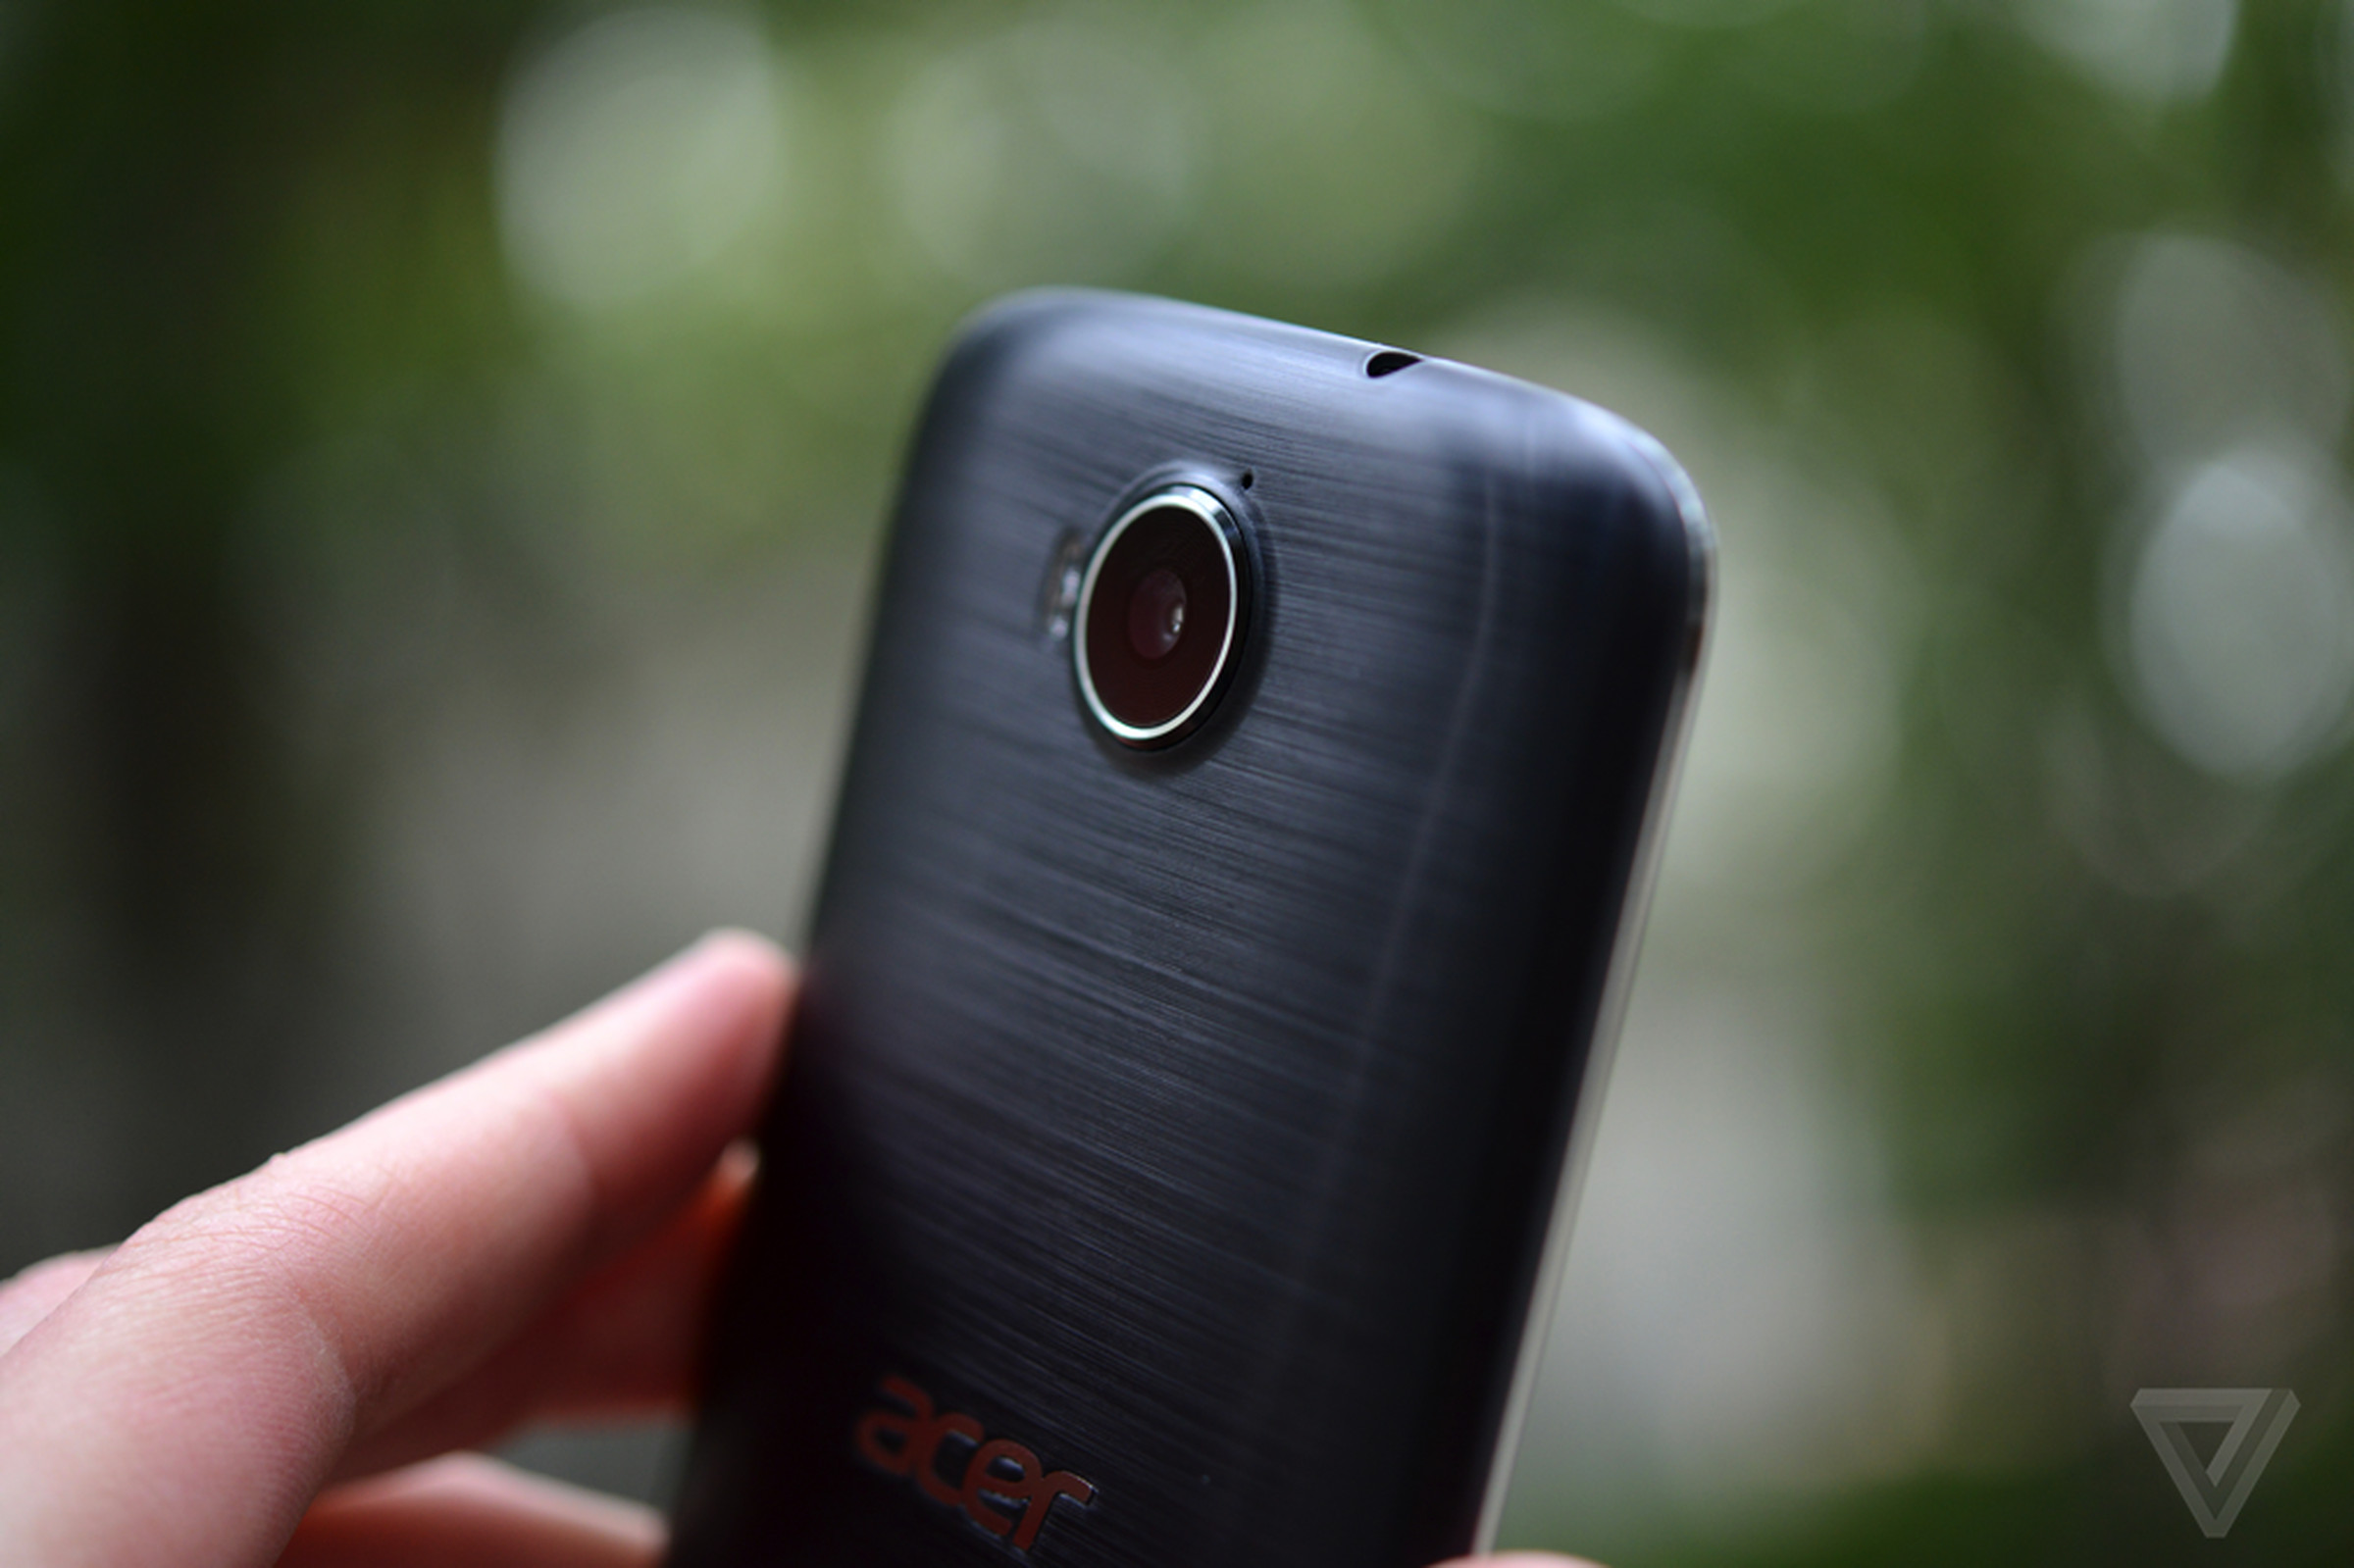 Acer Liquid Jade Primo hands-on photos at CES 2016